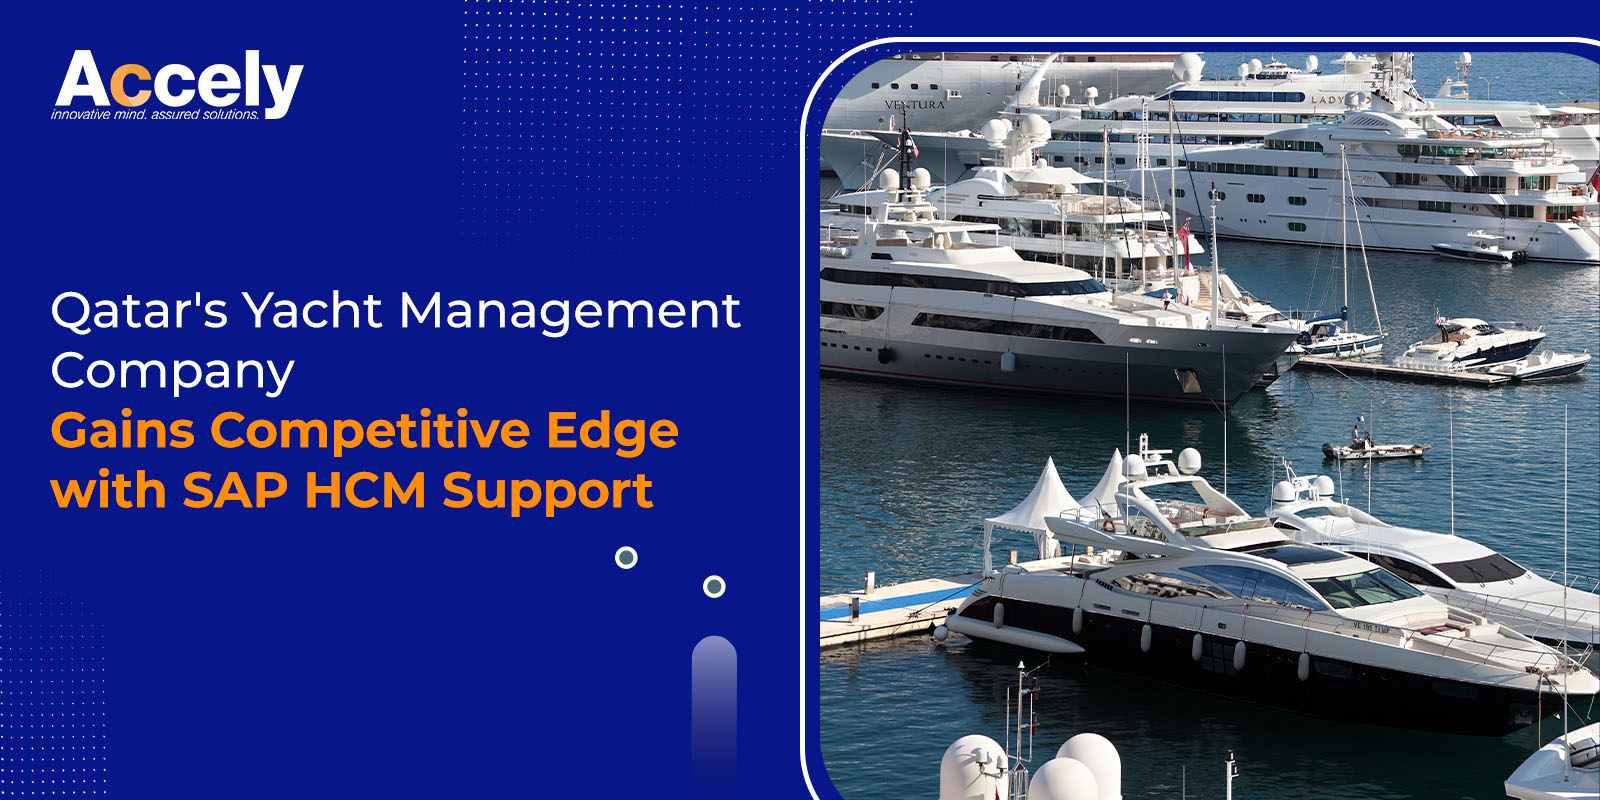 Qatar's Yacht Management Company Gains Competitive Edge with SAP HCM Support